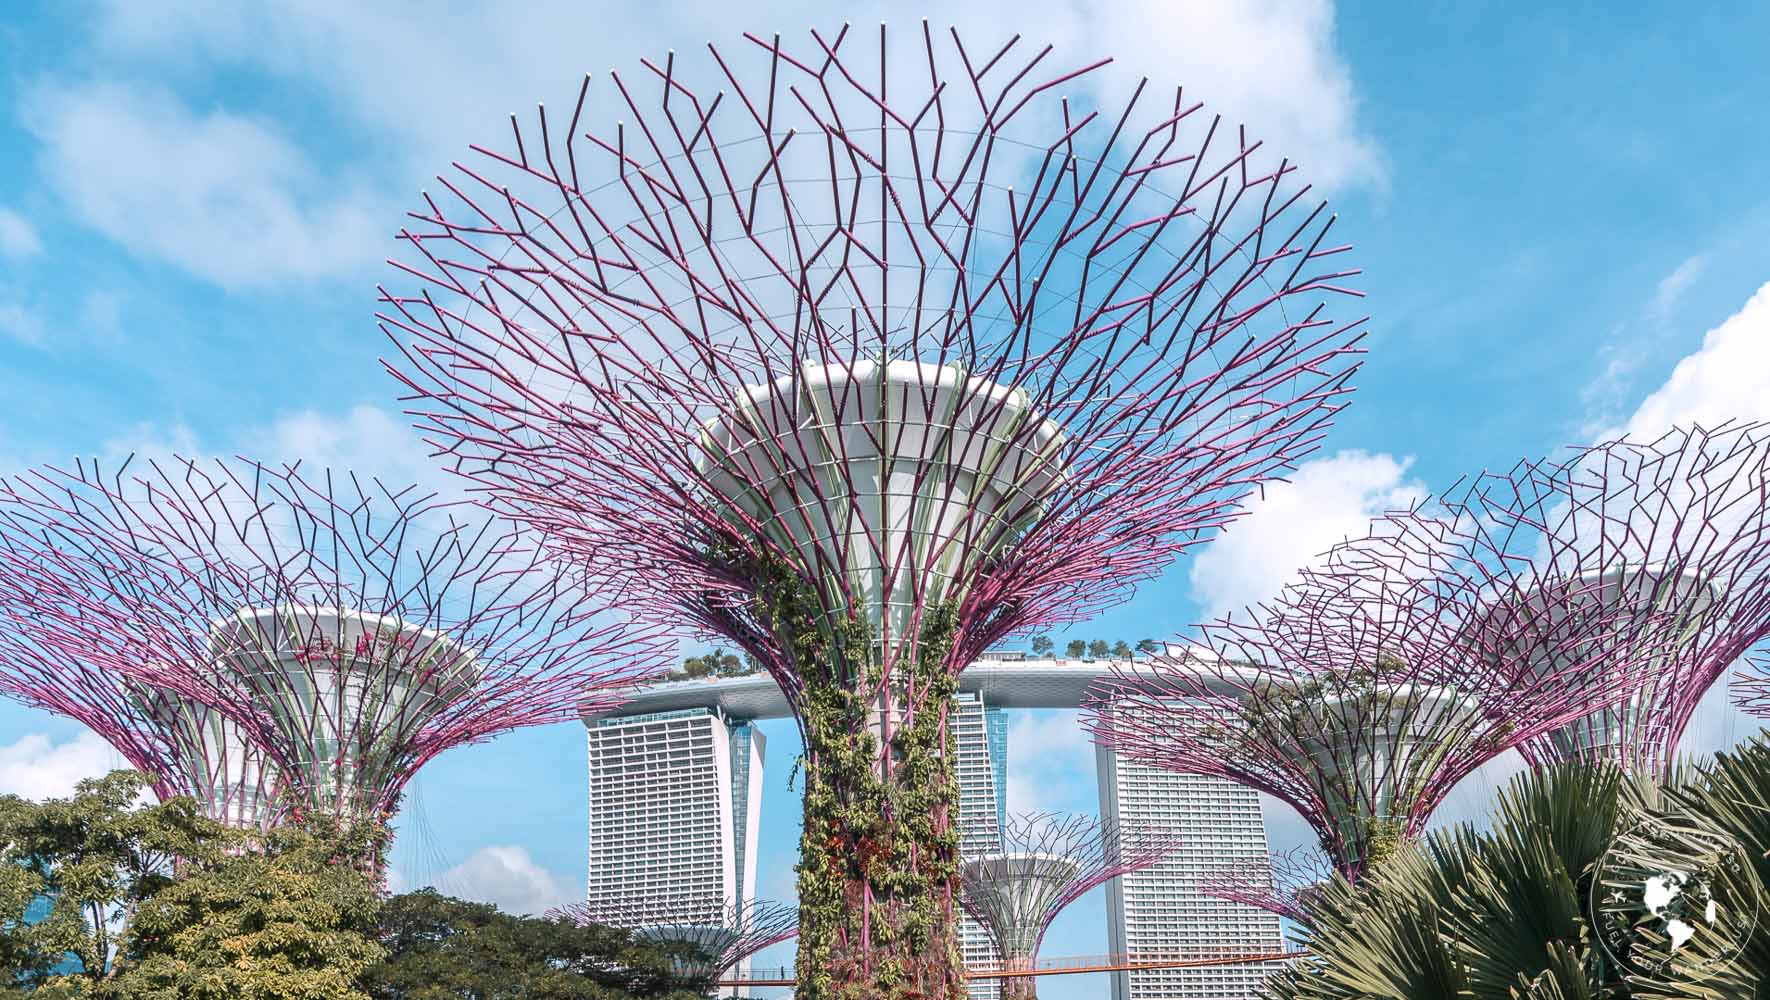 Best Photo Spots in Gardens by the Bay, Singapore